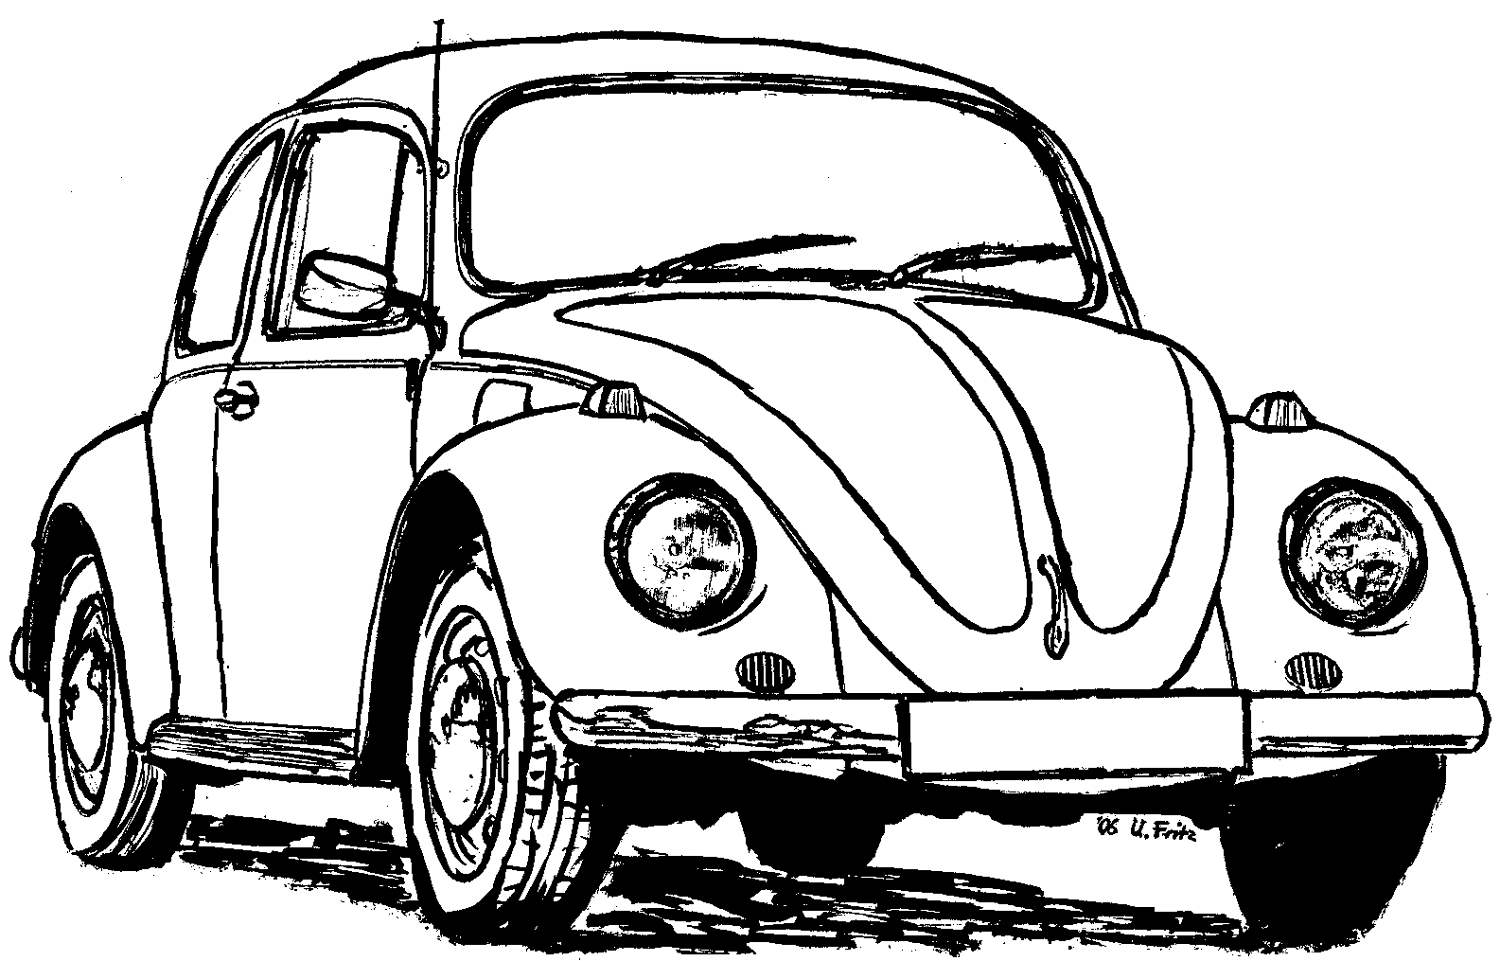 volkswagen beetle coloring pages